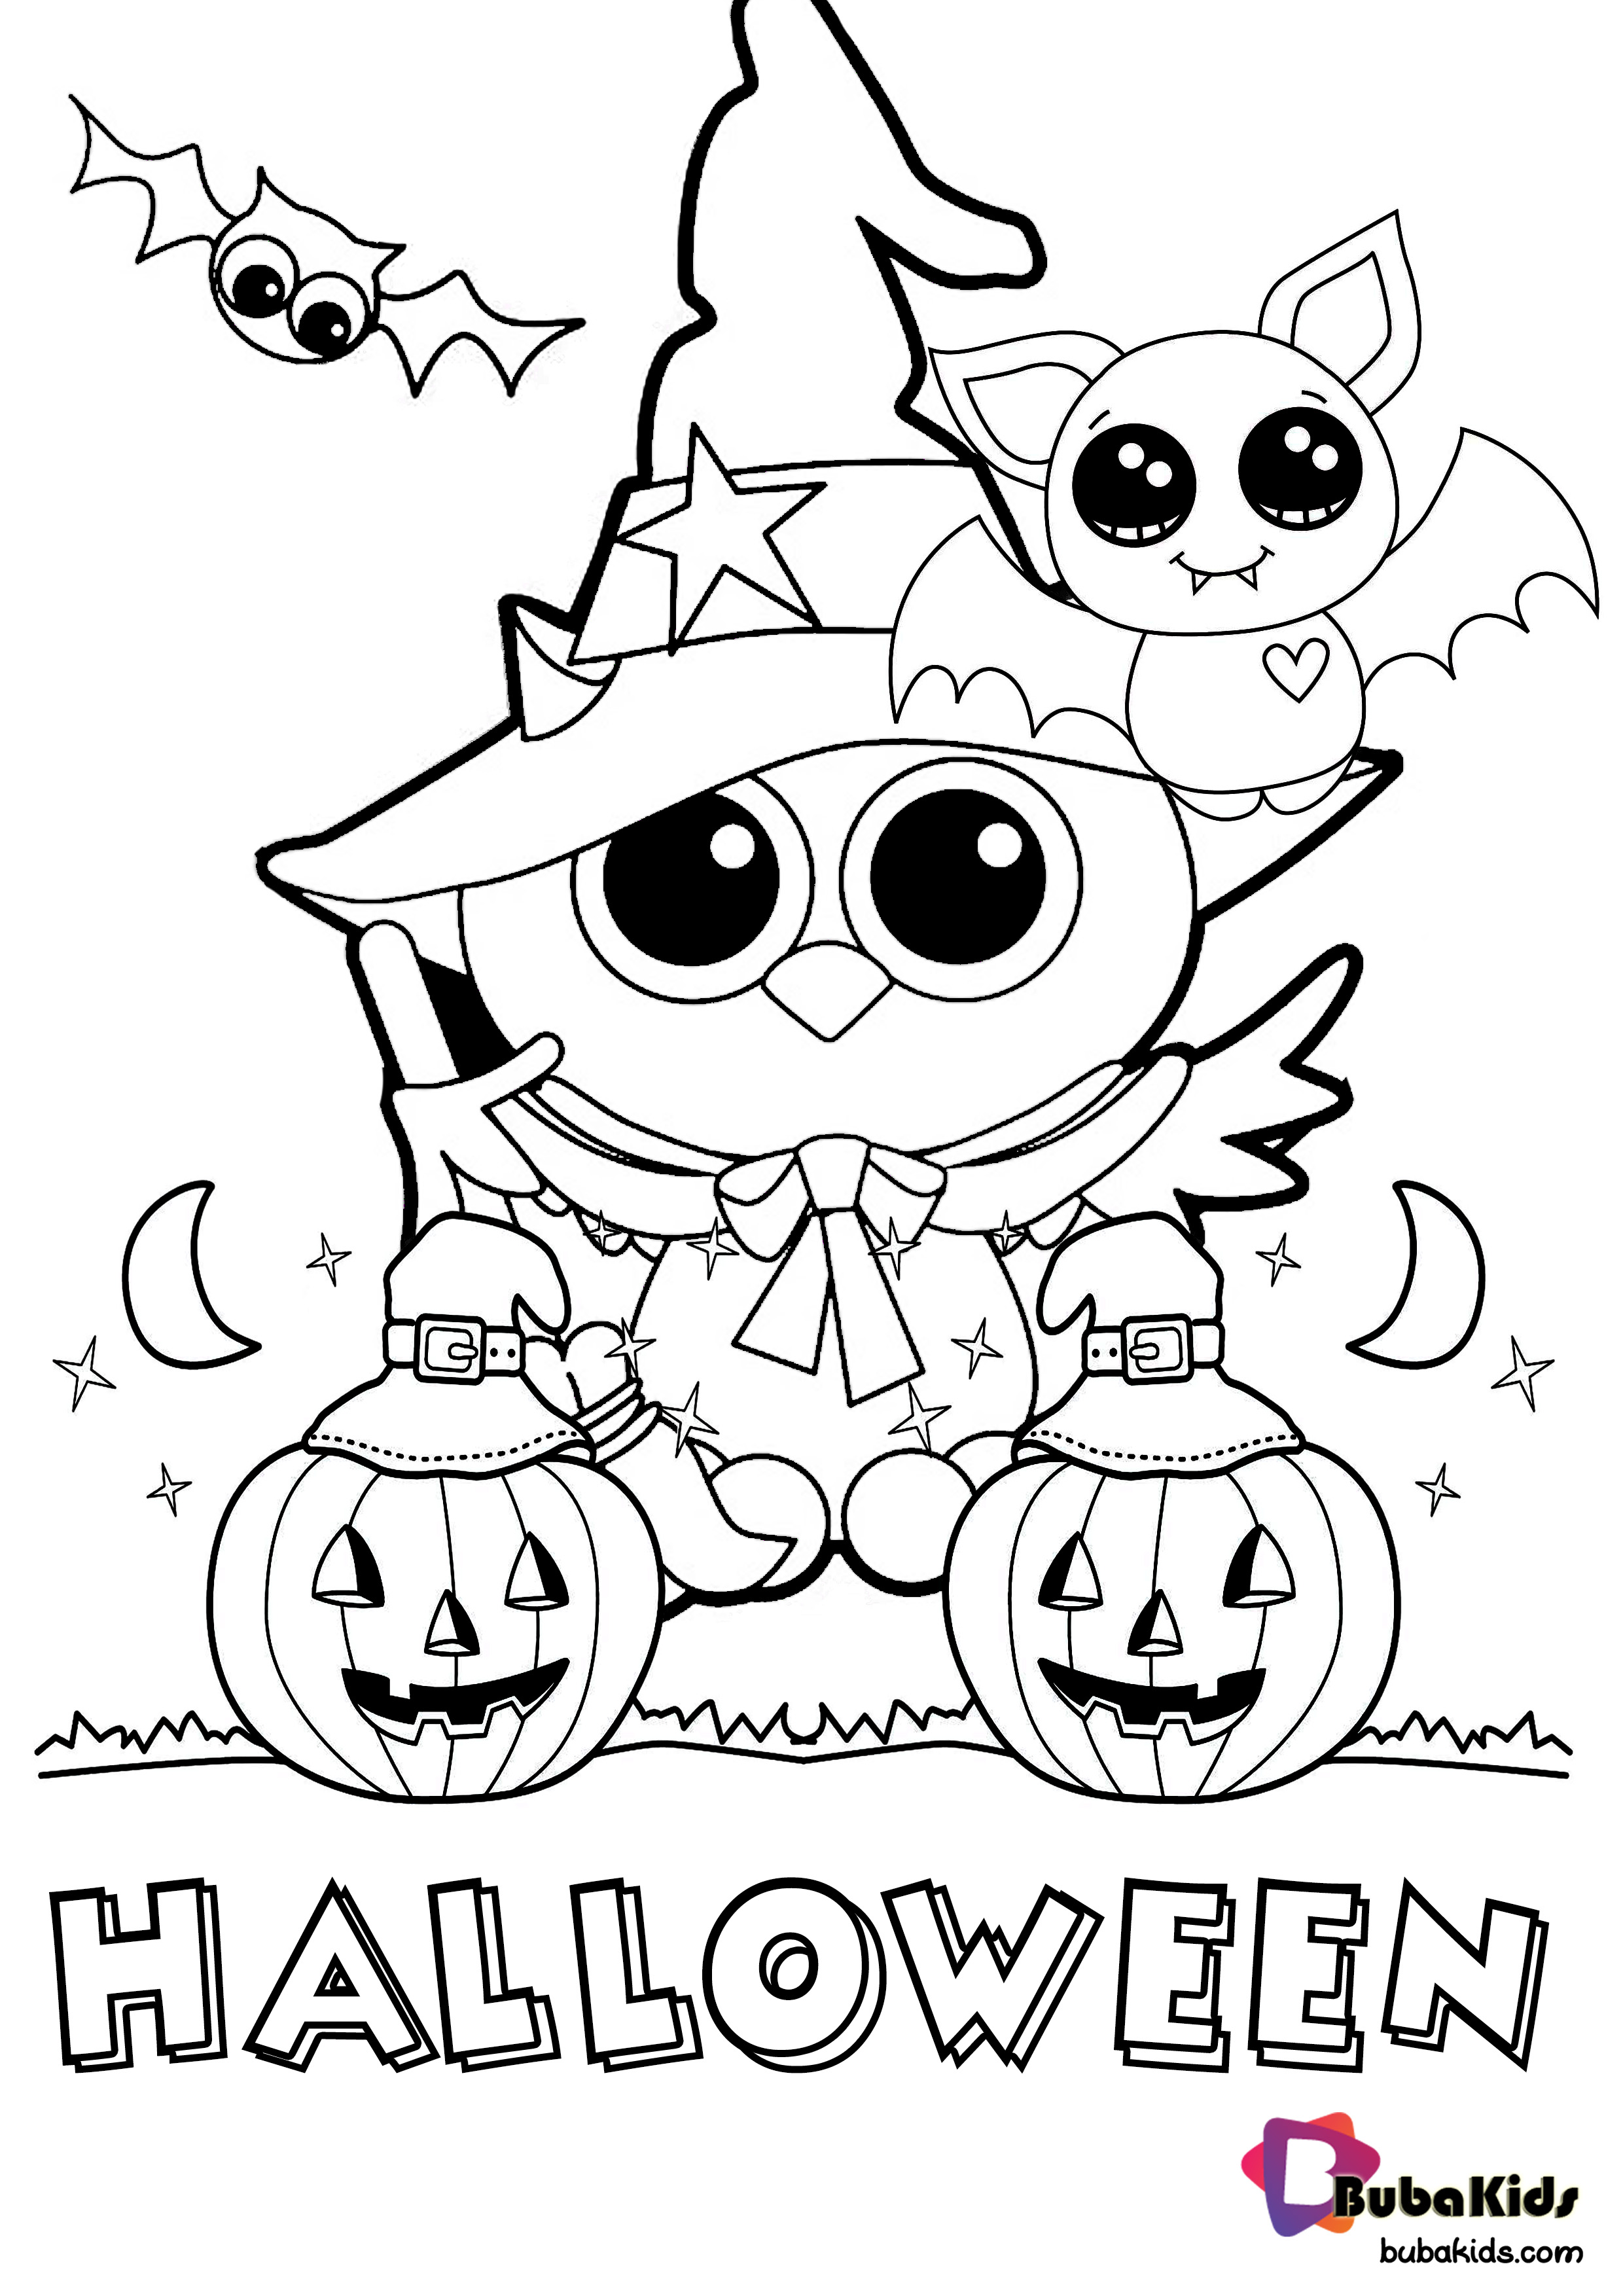 Halloween Coloring Pages Printable Free BubaKids